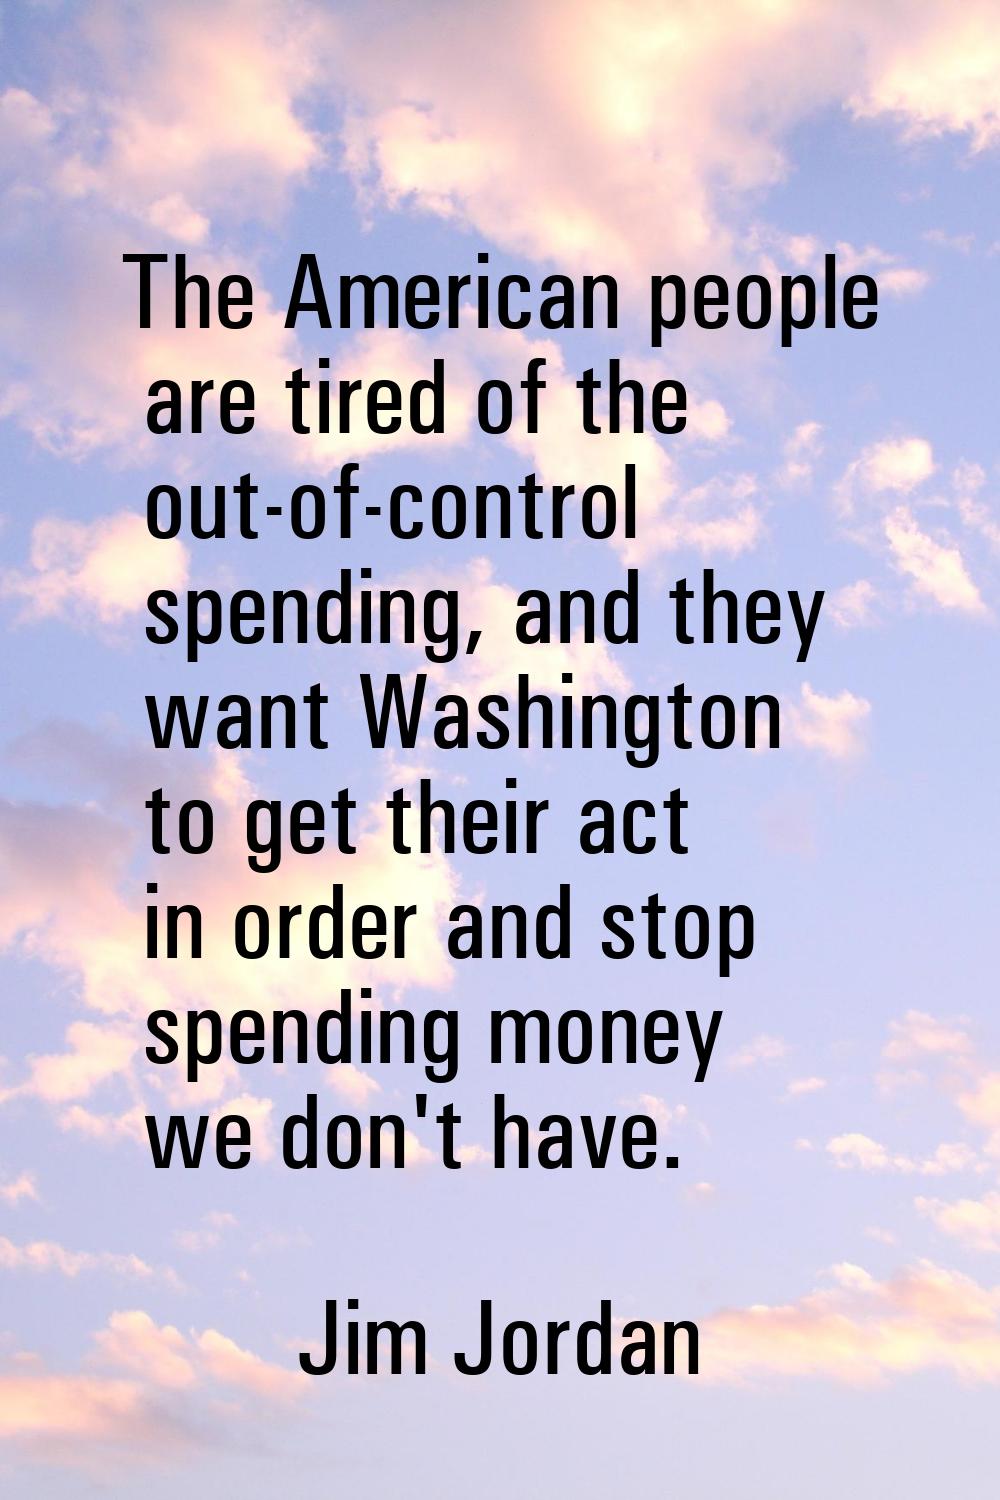 The American people are tired of the out-of-control spending, and they want Washington to get their